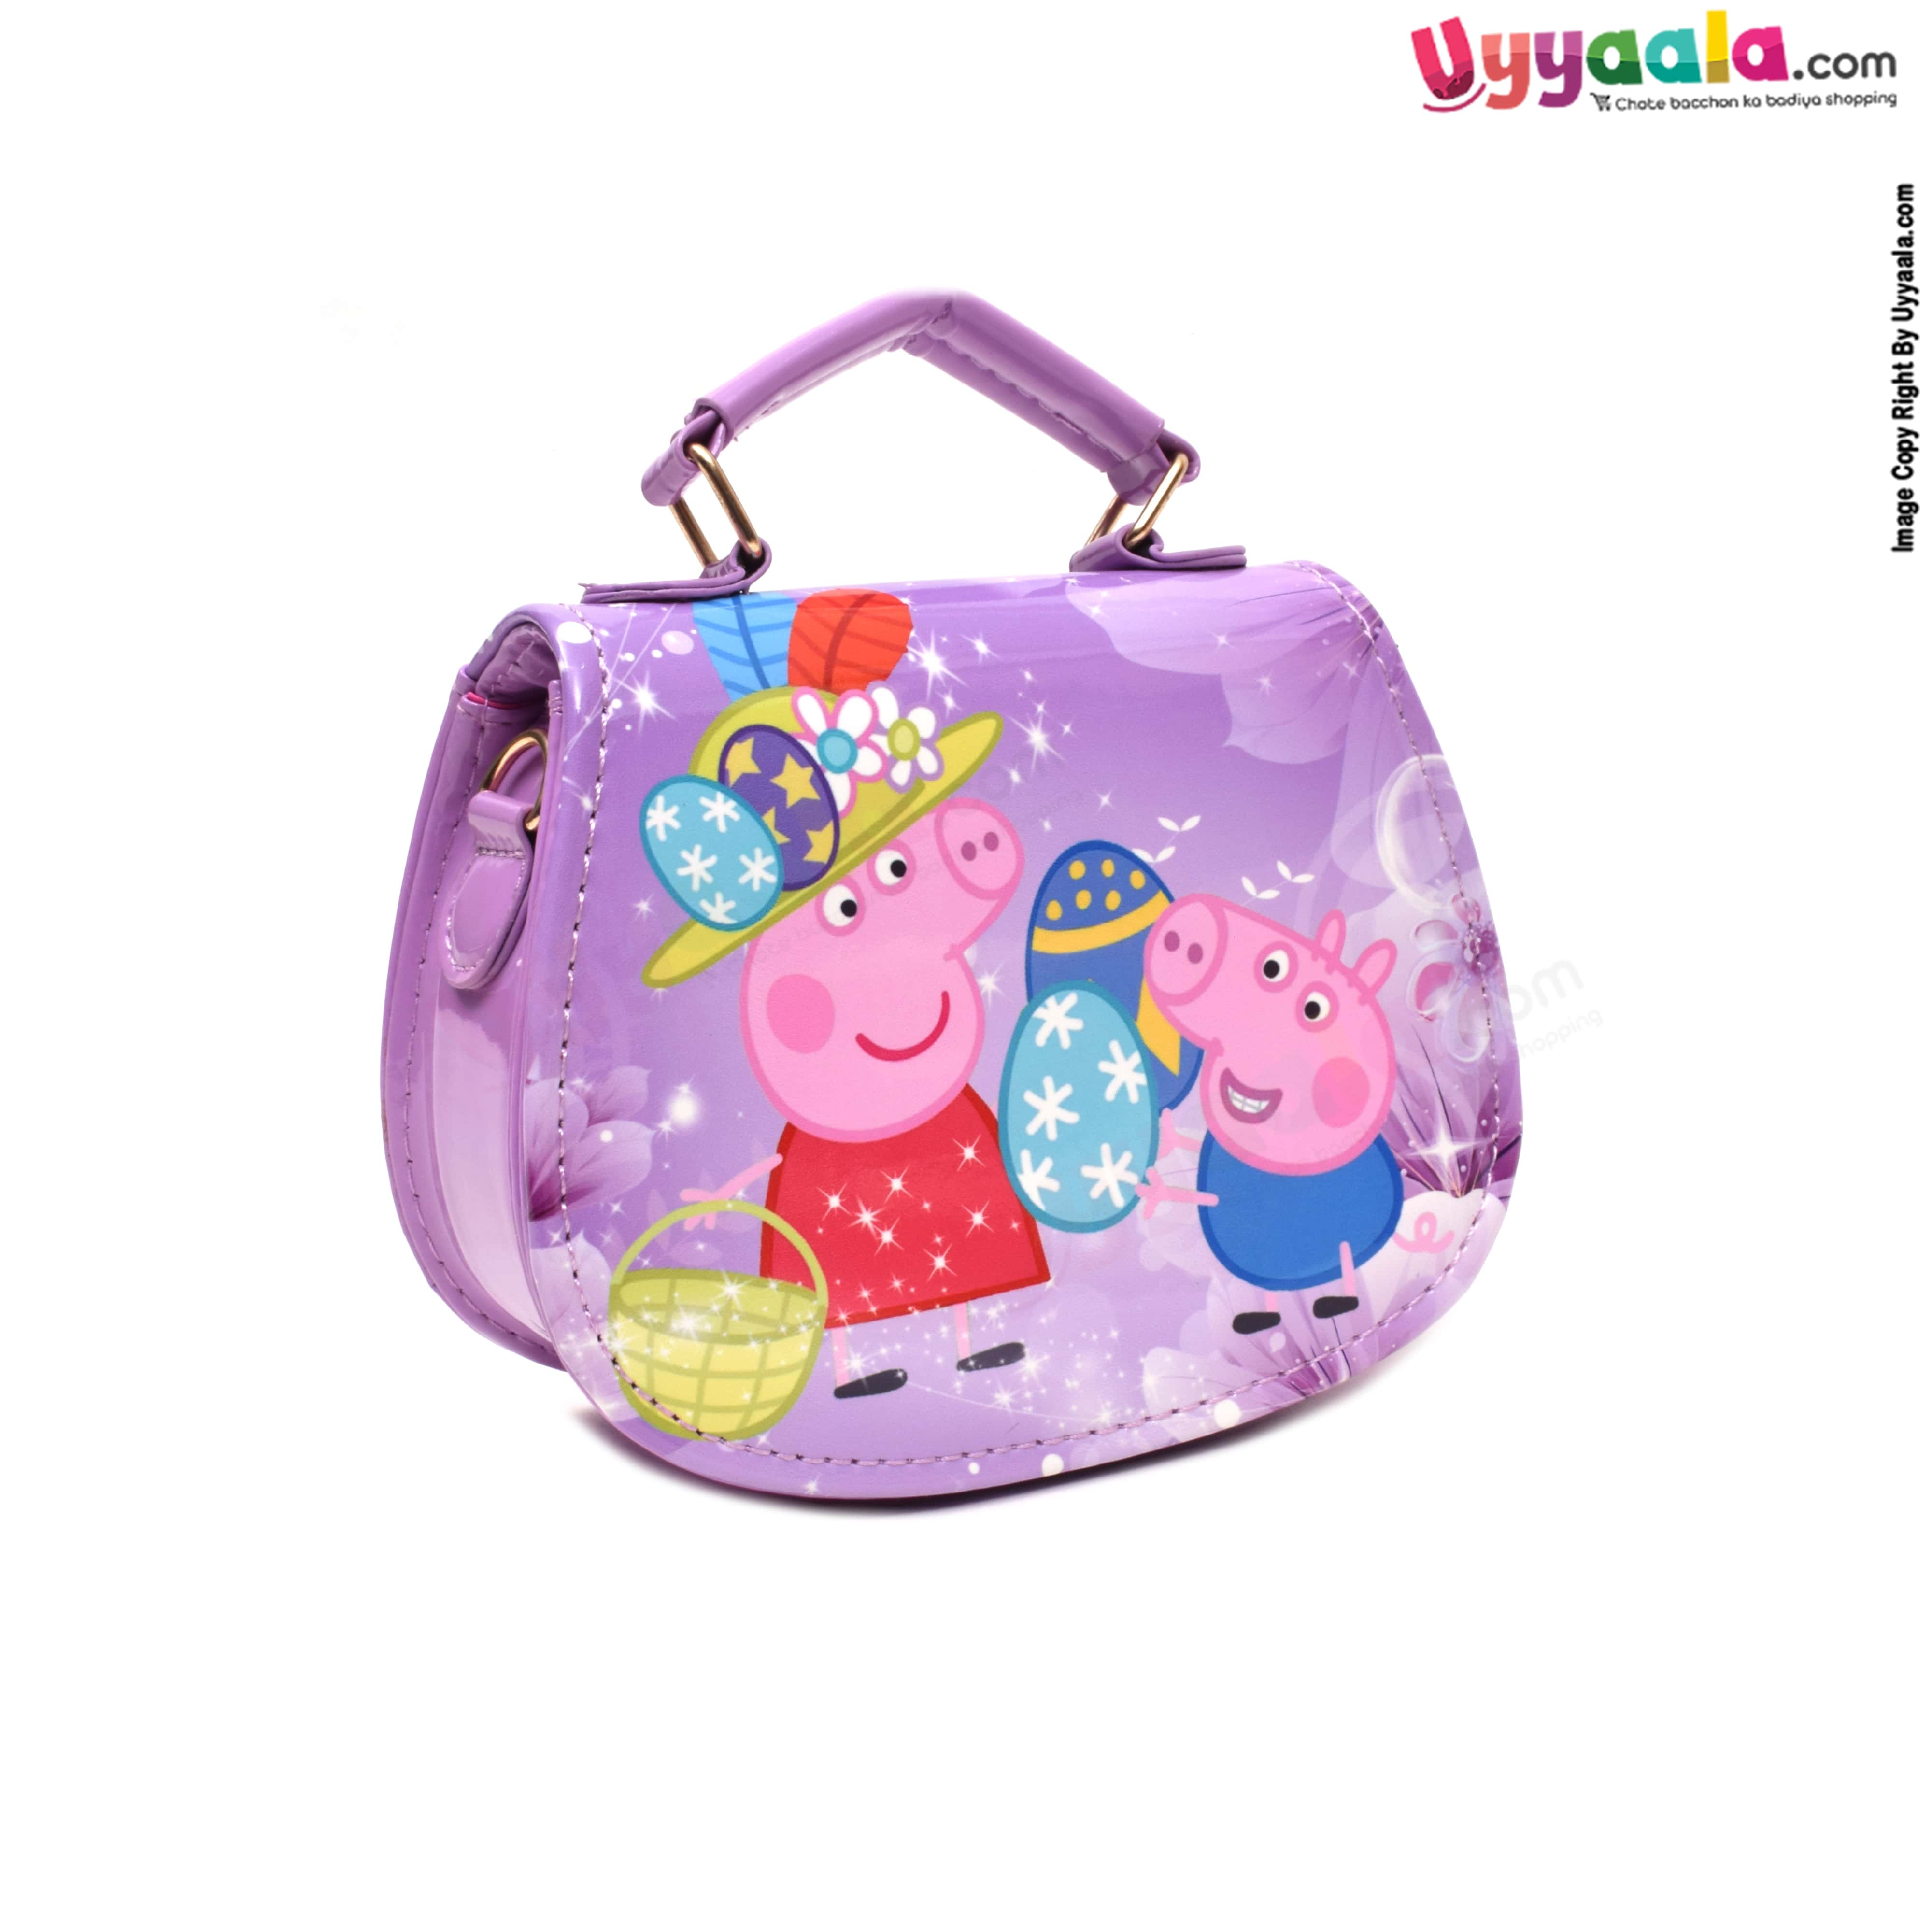 Party wear sling hand bags for kids with adjustable strap, peppa pig print, age 3+ years-Purple